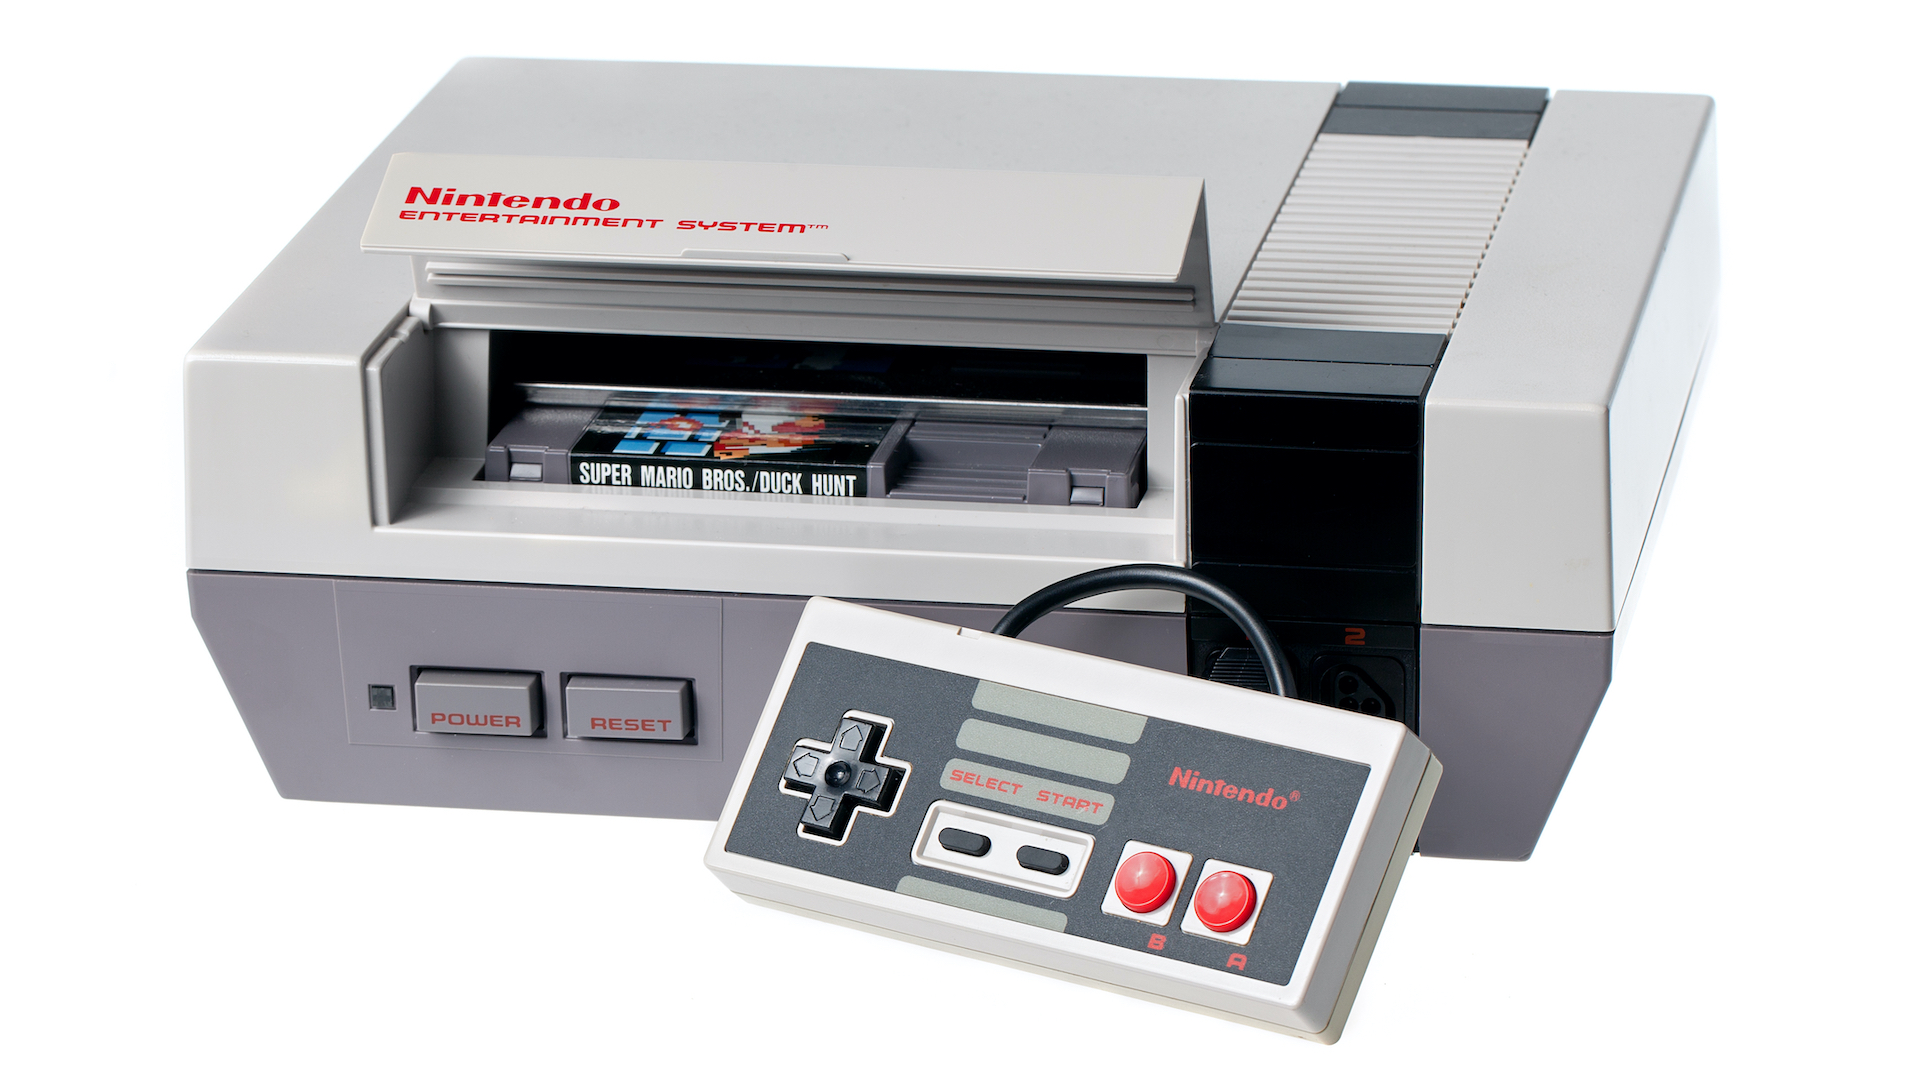 The first ever Nintendo console